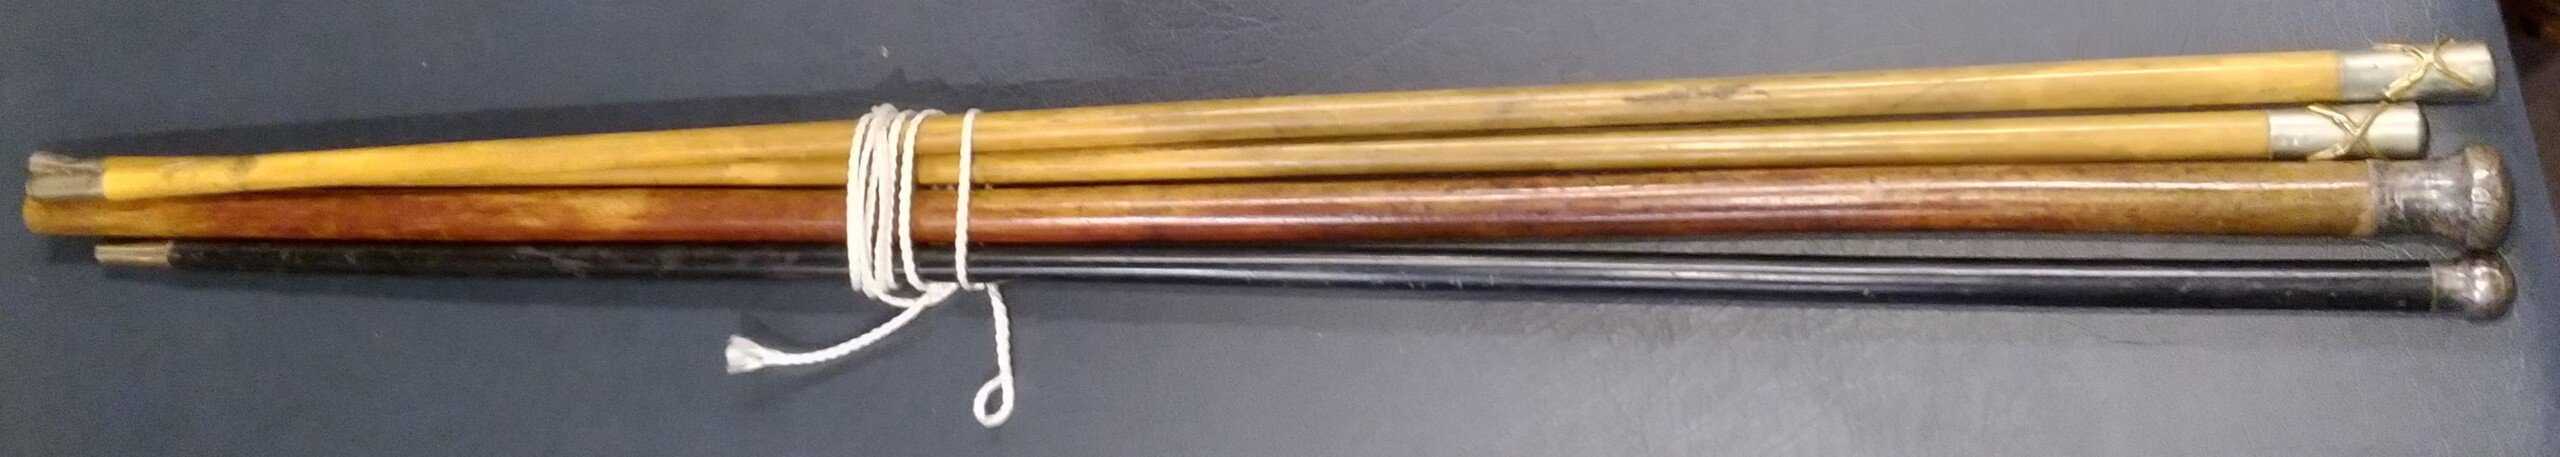 Swagger sticks – 48th Highlanders Museum Online